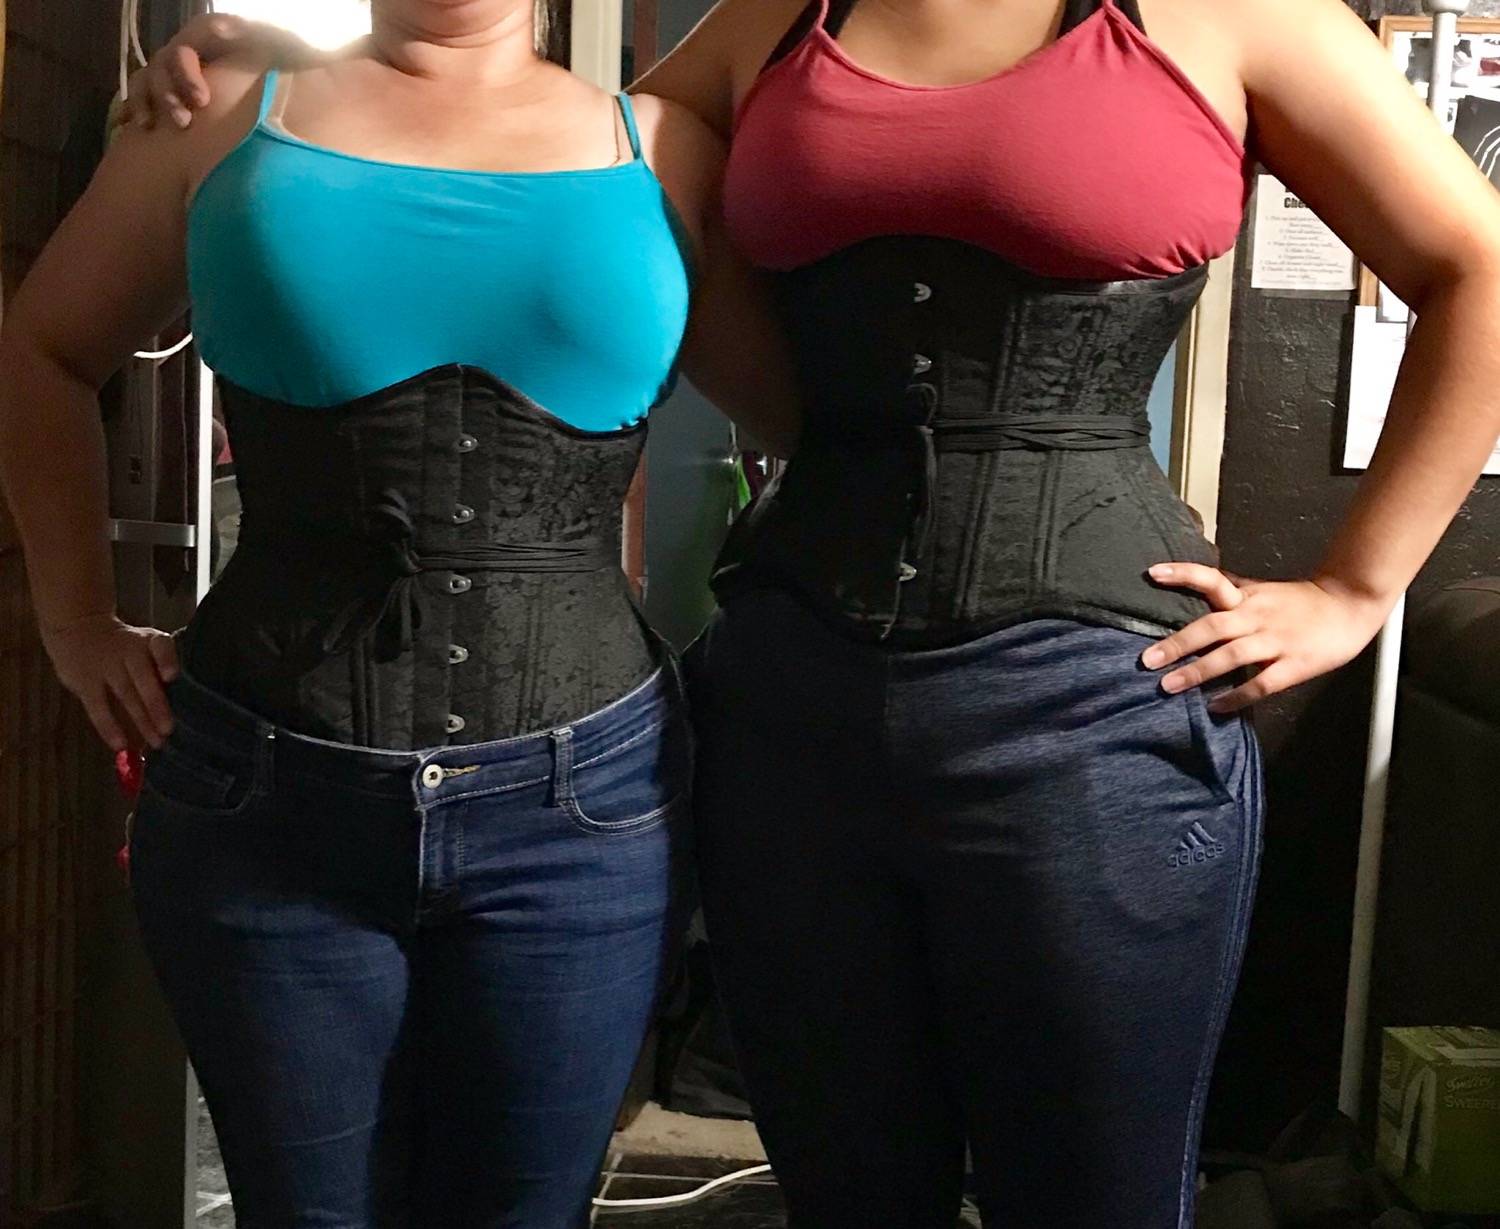 The Five Best Waist Trainers for Beginners